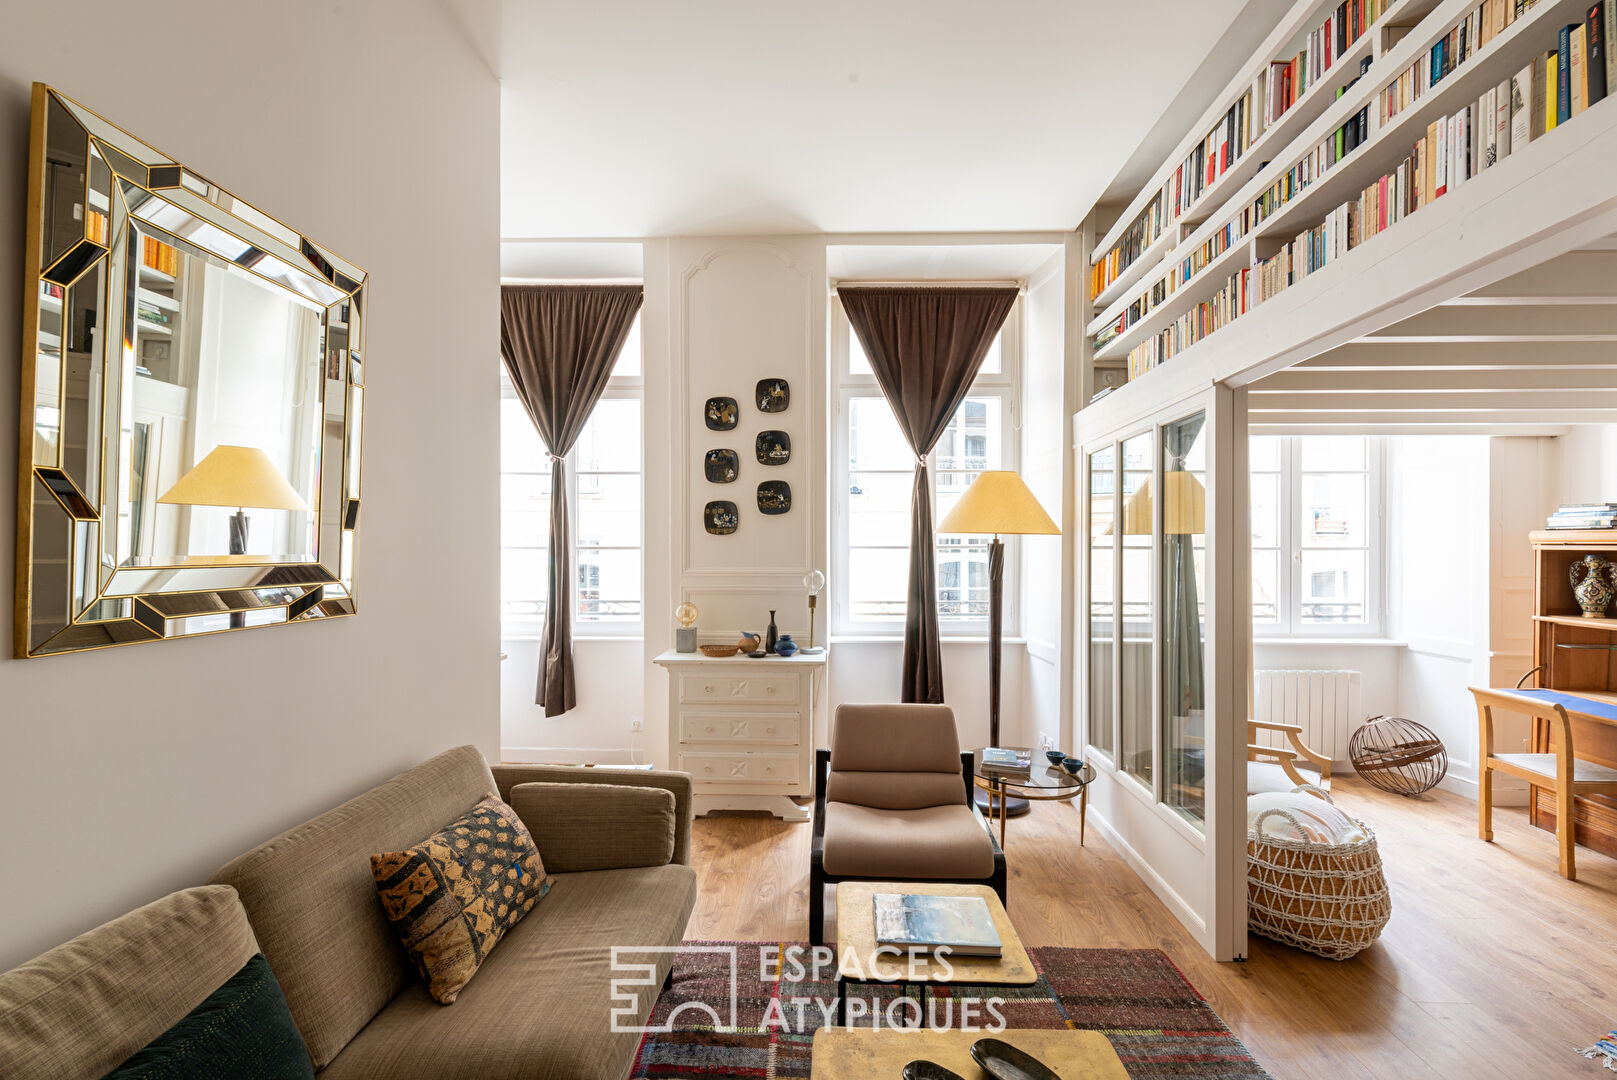 Renovated apartment in the heart of town